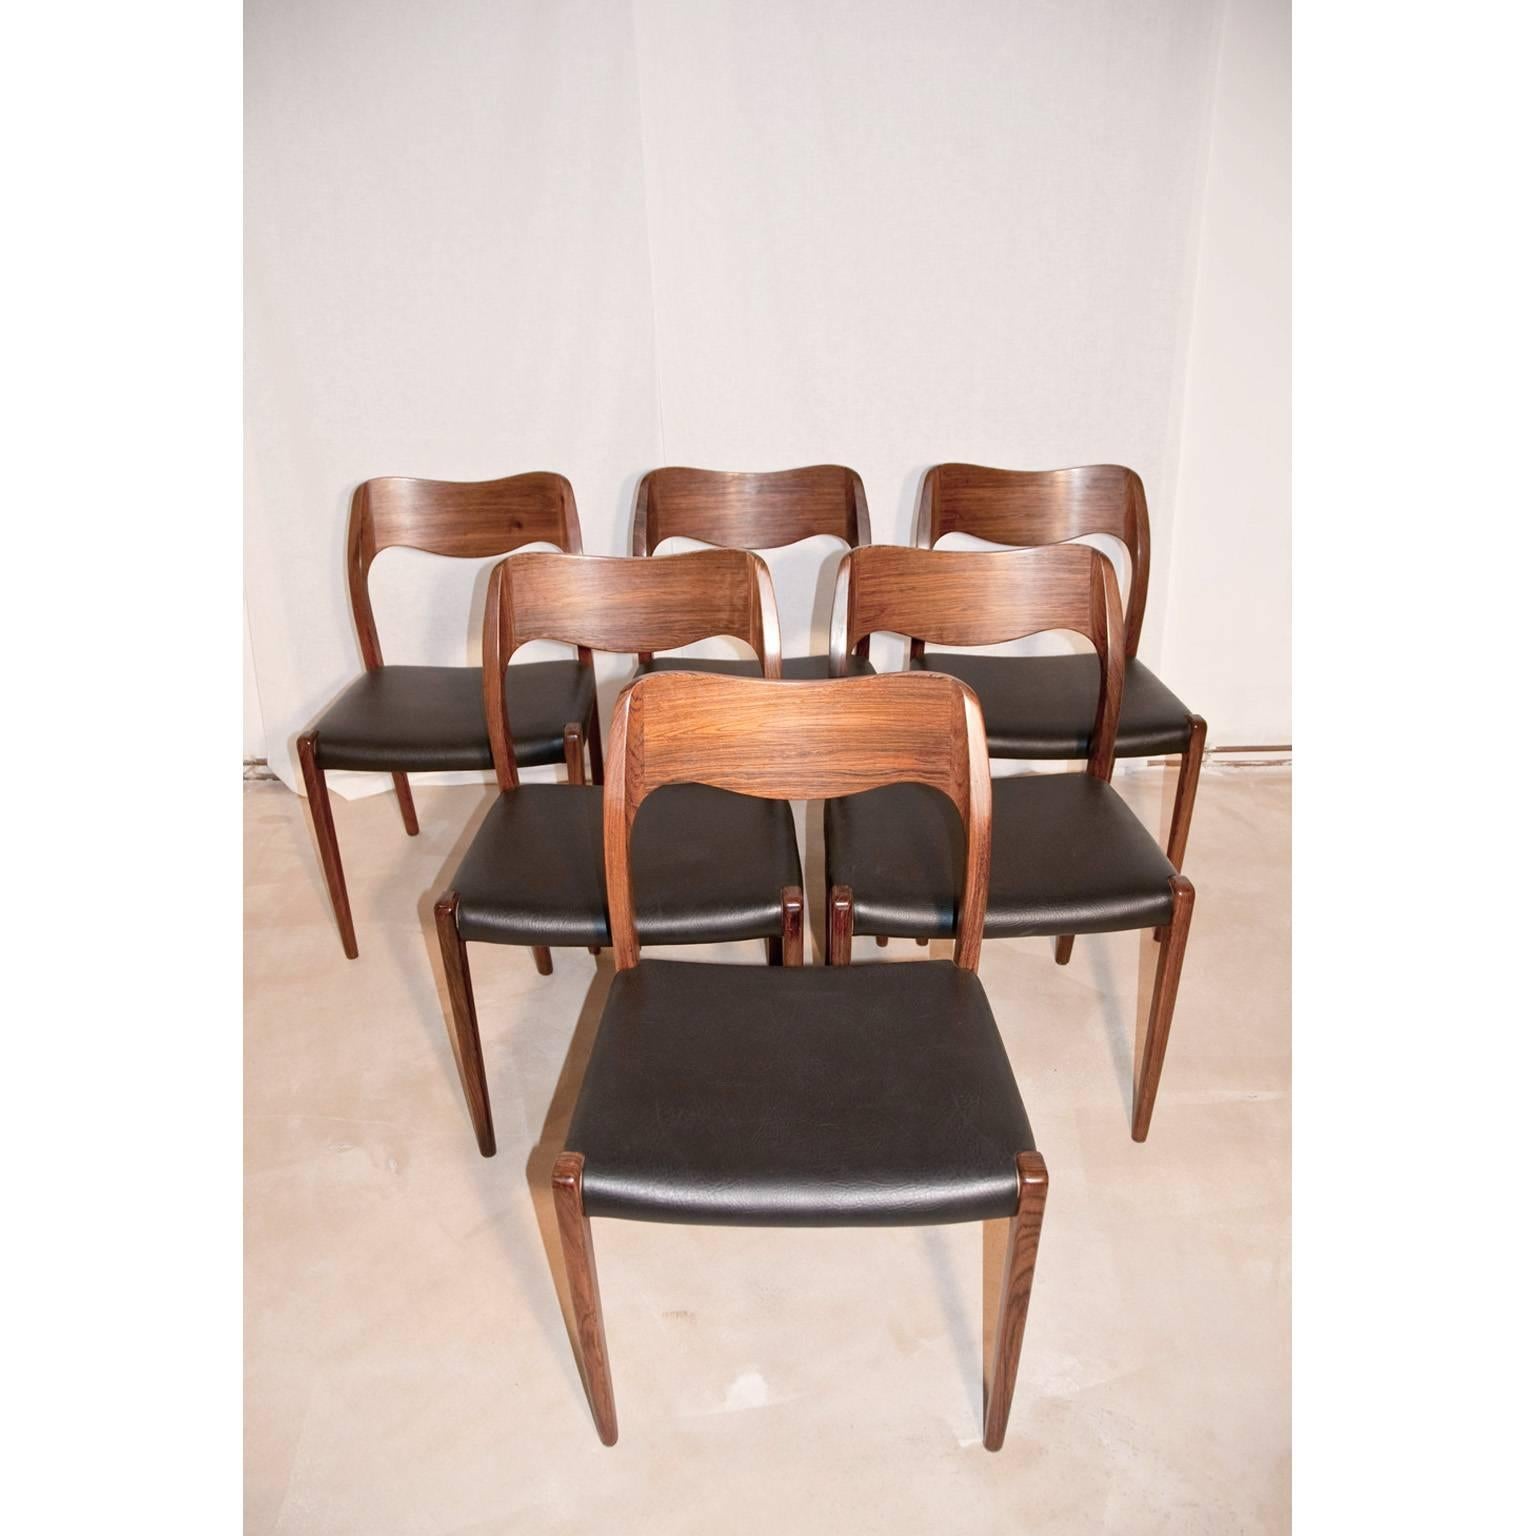 Mid-20th Century Danish Rosewood Dining Set by Moller Chairs No 71 and Table by Karl Ekselius For Sale